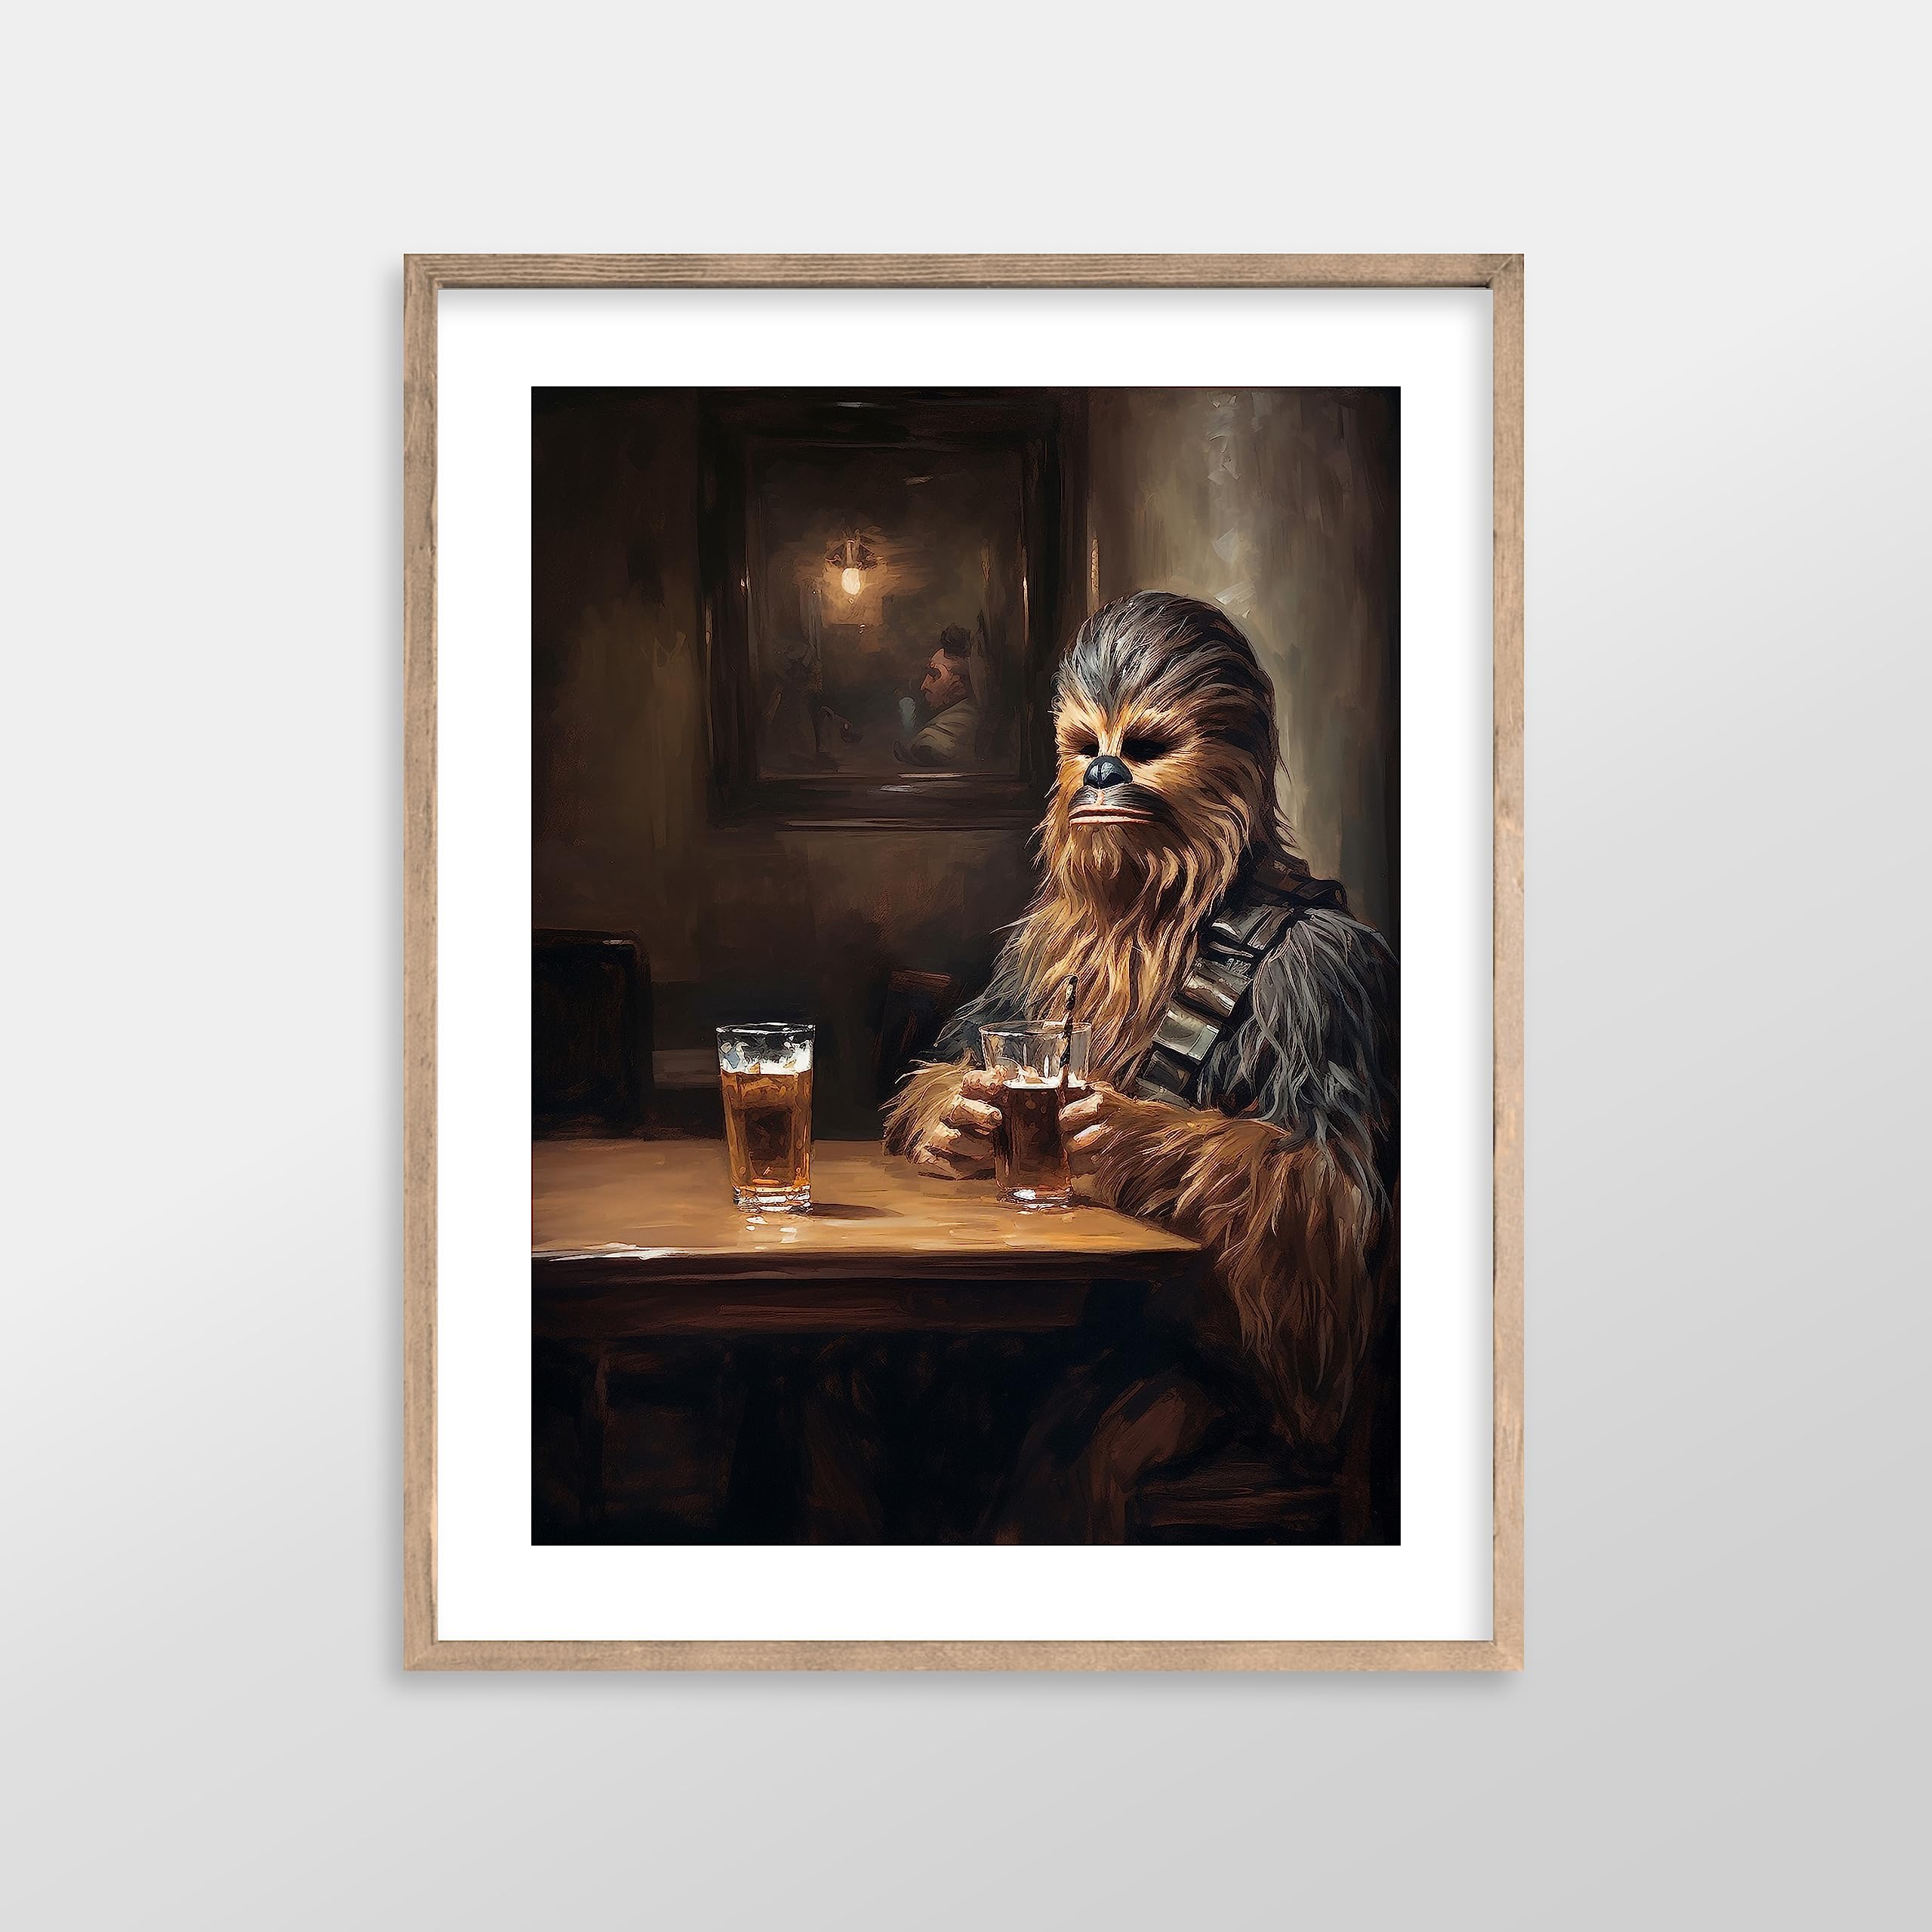 Star Wars Bar Art Prints - Premium Giclee Fine Art Print - Aesthetic Man Cave Wall Décor, Bourbon Whiskey Print Poster for Bar and Home Decor, Ready to Frame